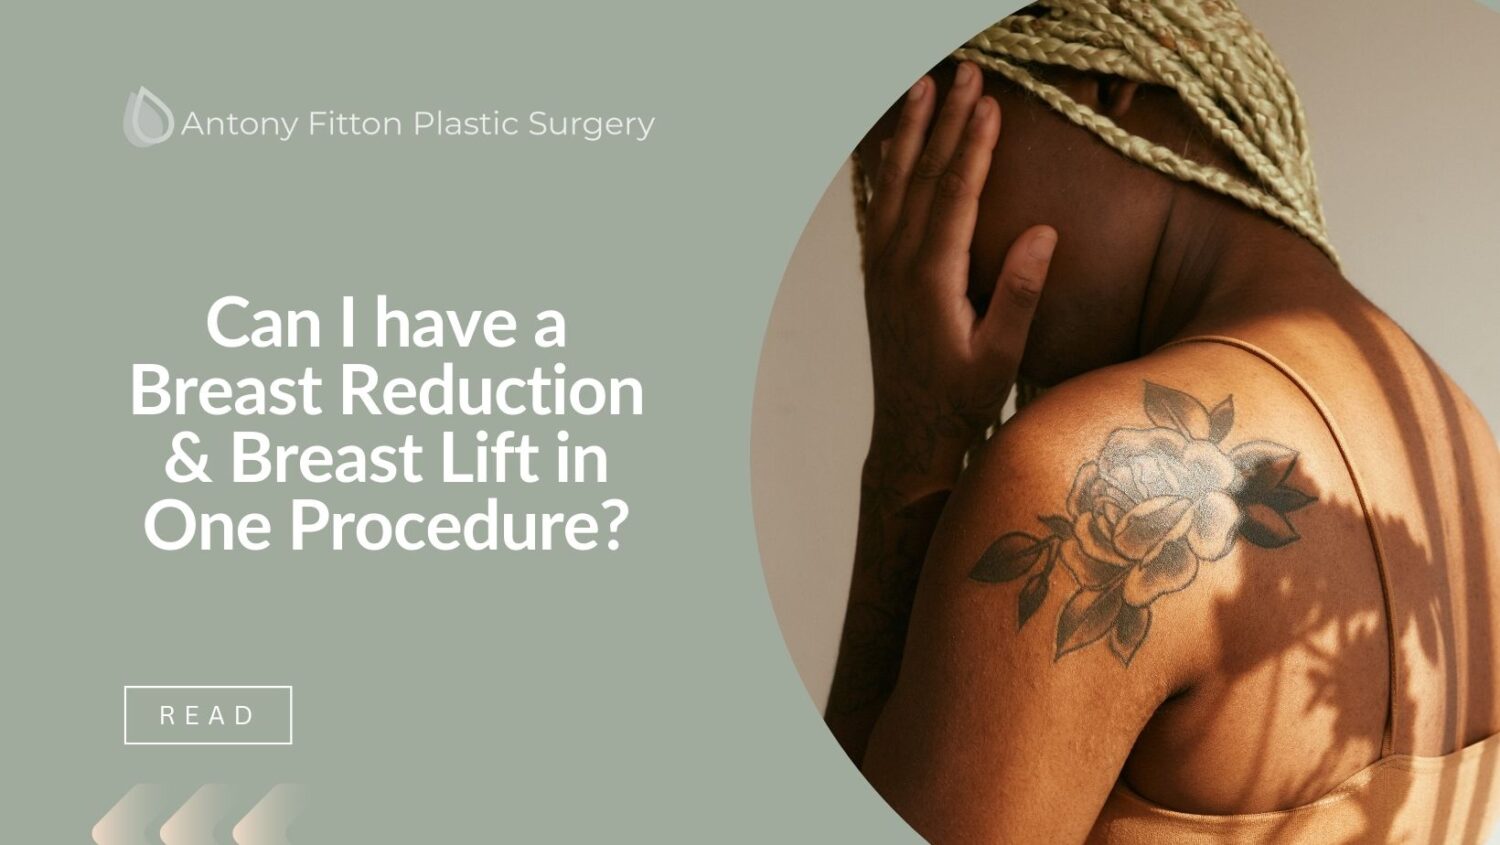 Can I have a Breast Reduction & Breast Lift in One Procedure?